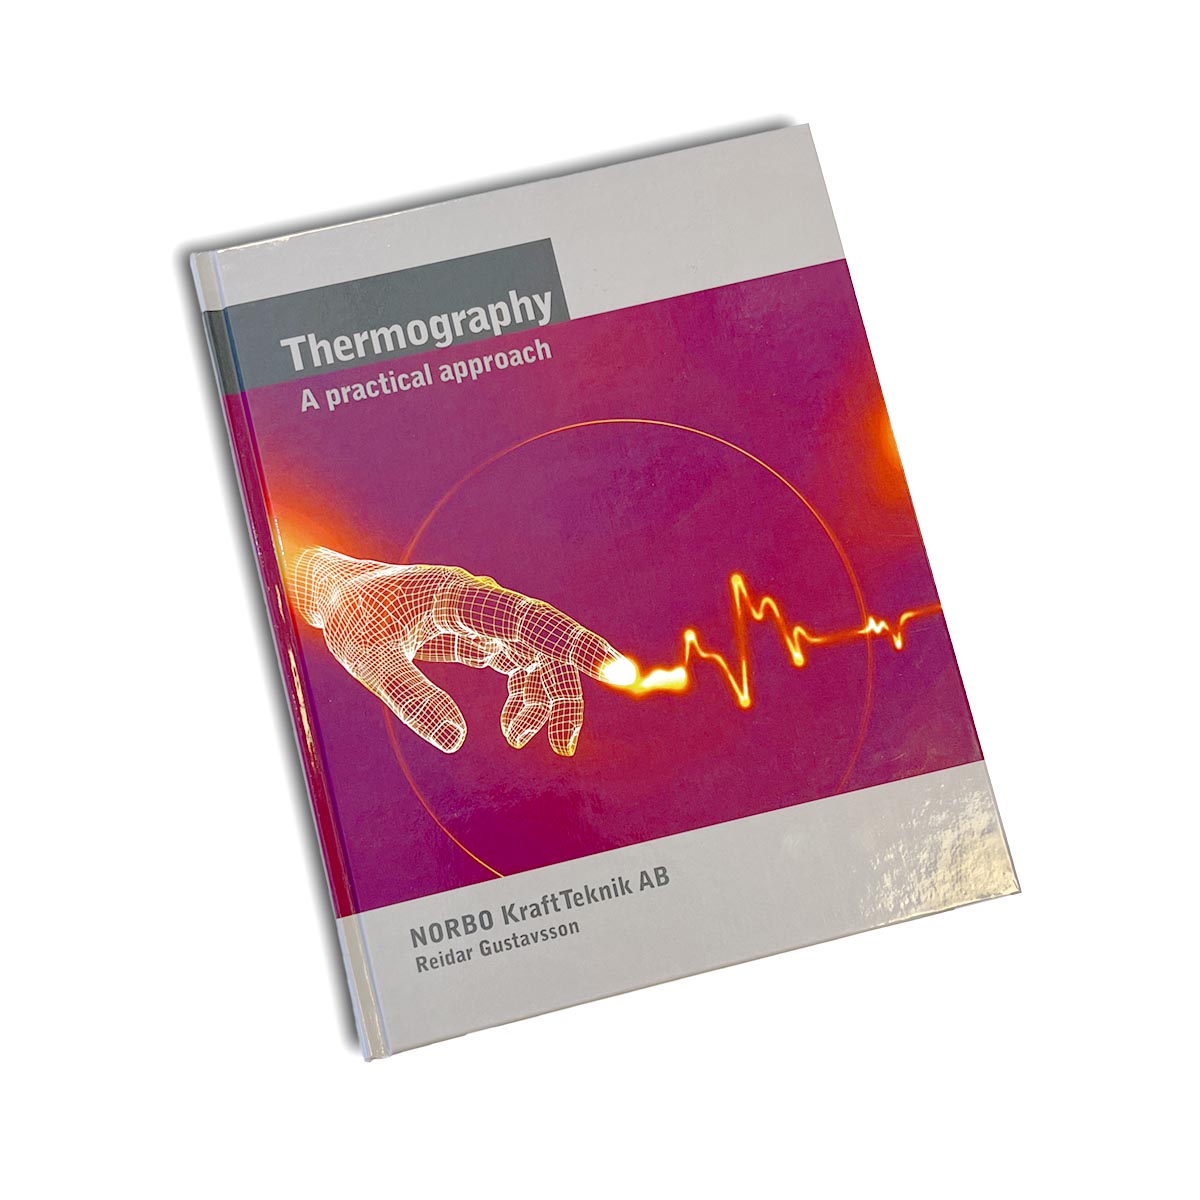 Thermography A practical approach - book